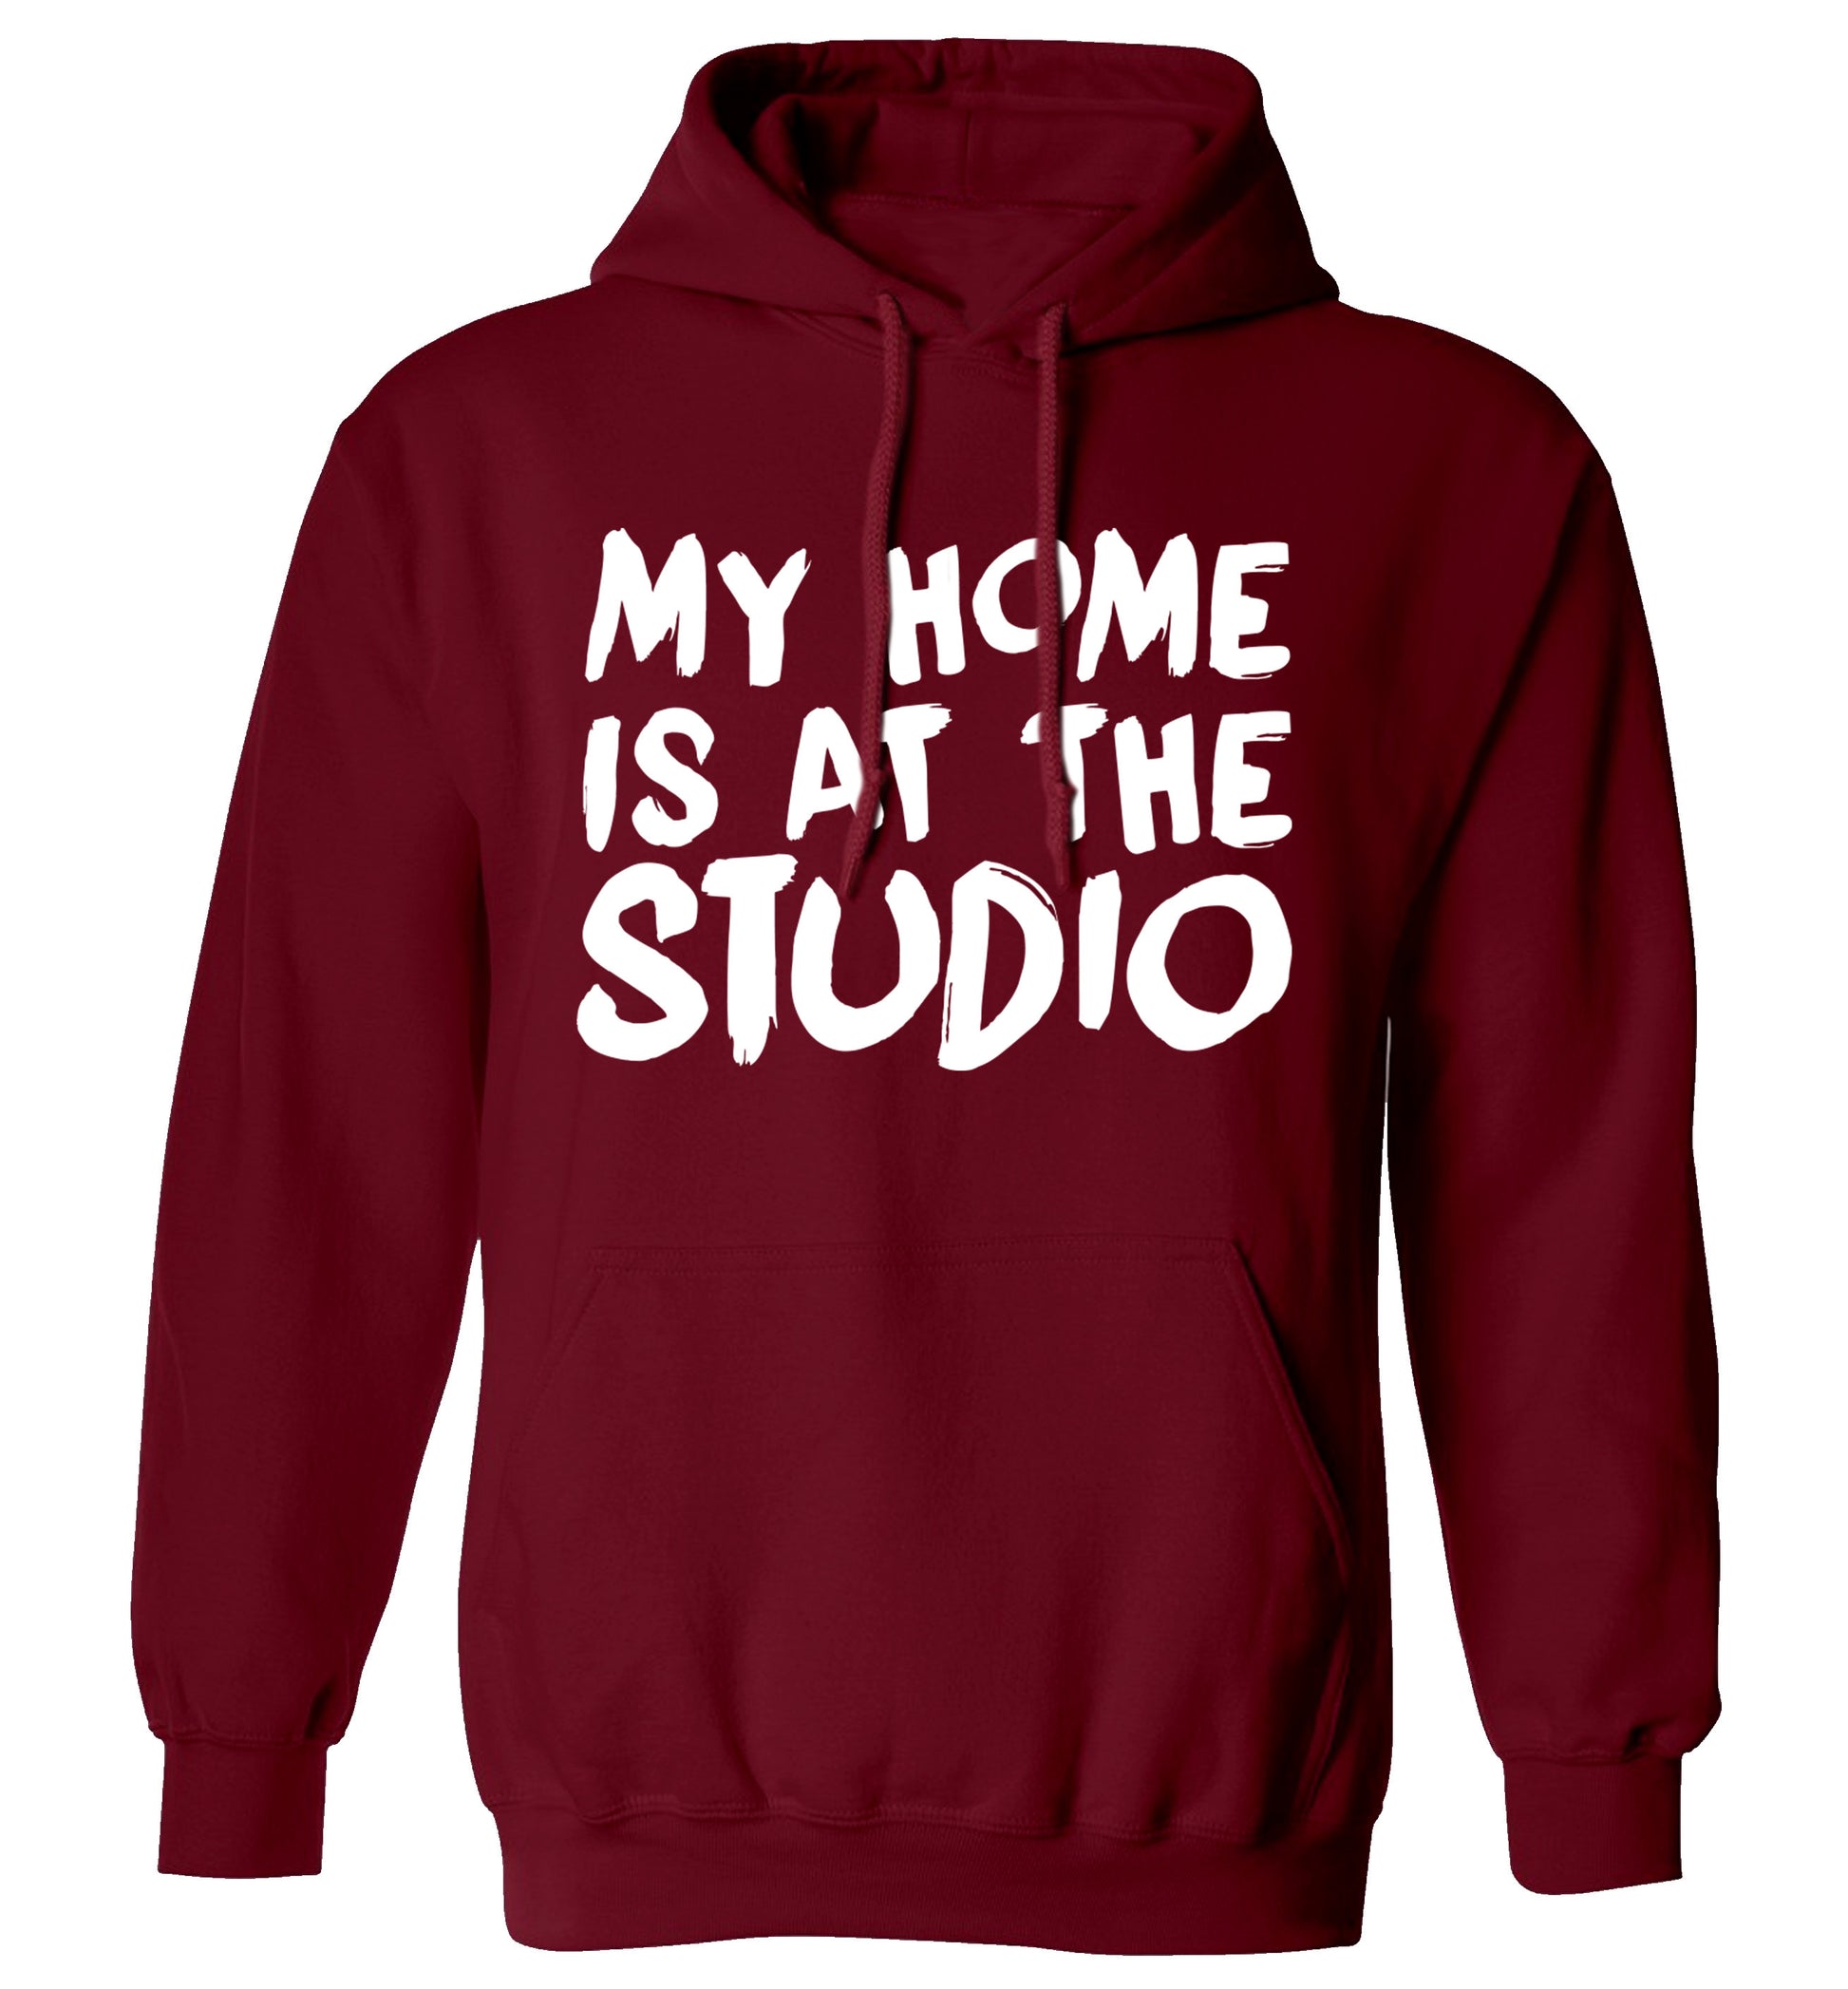 My home is at the studio adults unisex maroon hoodie 2XL